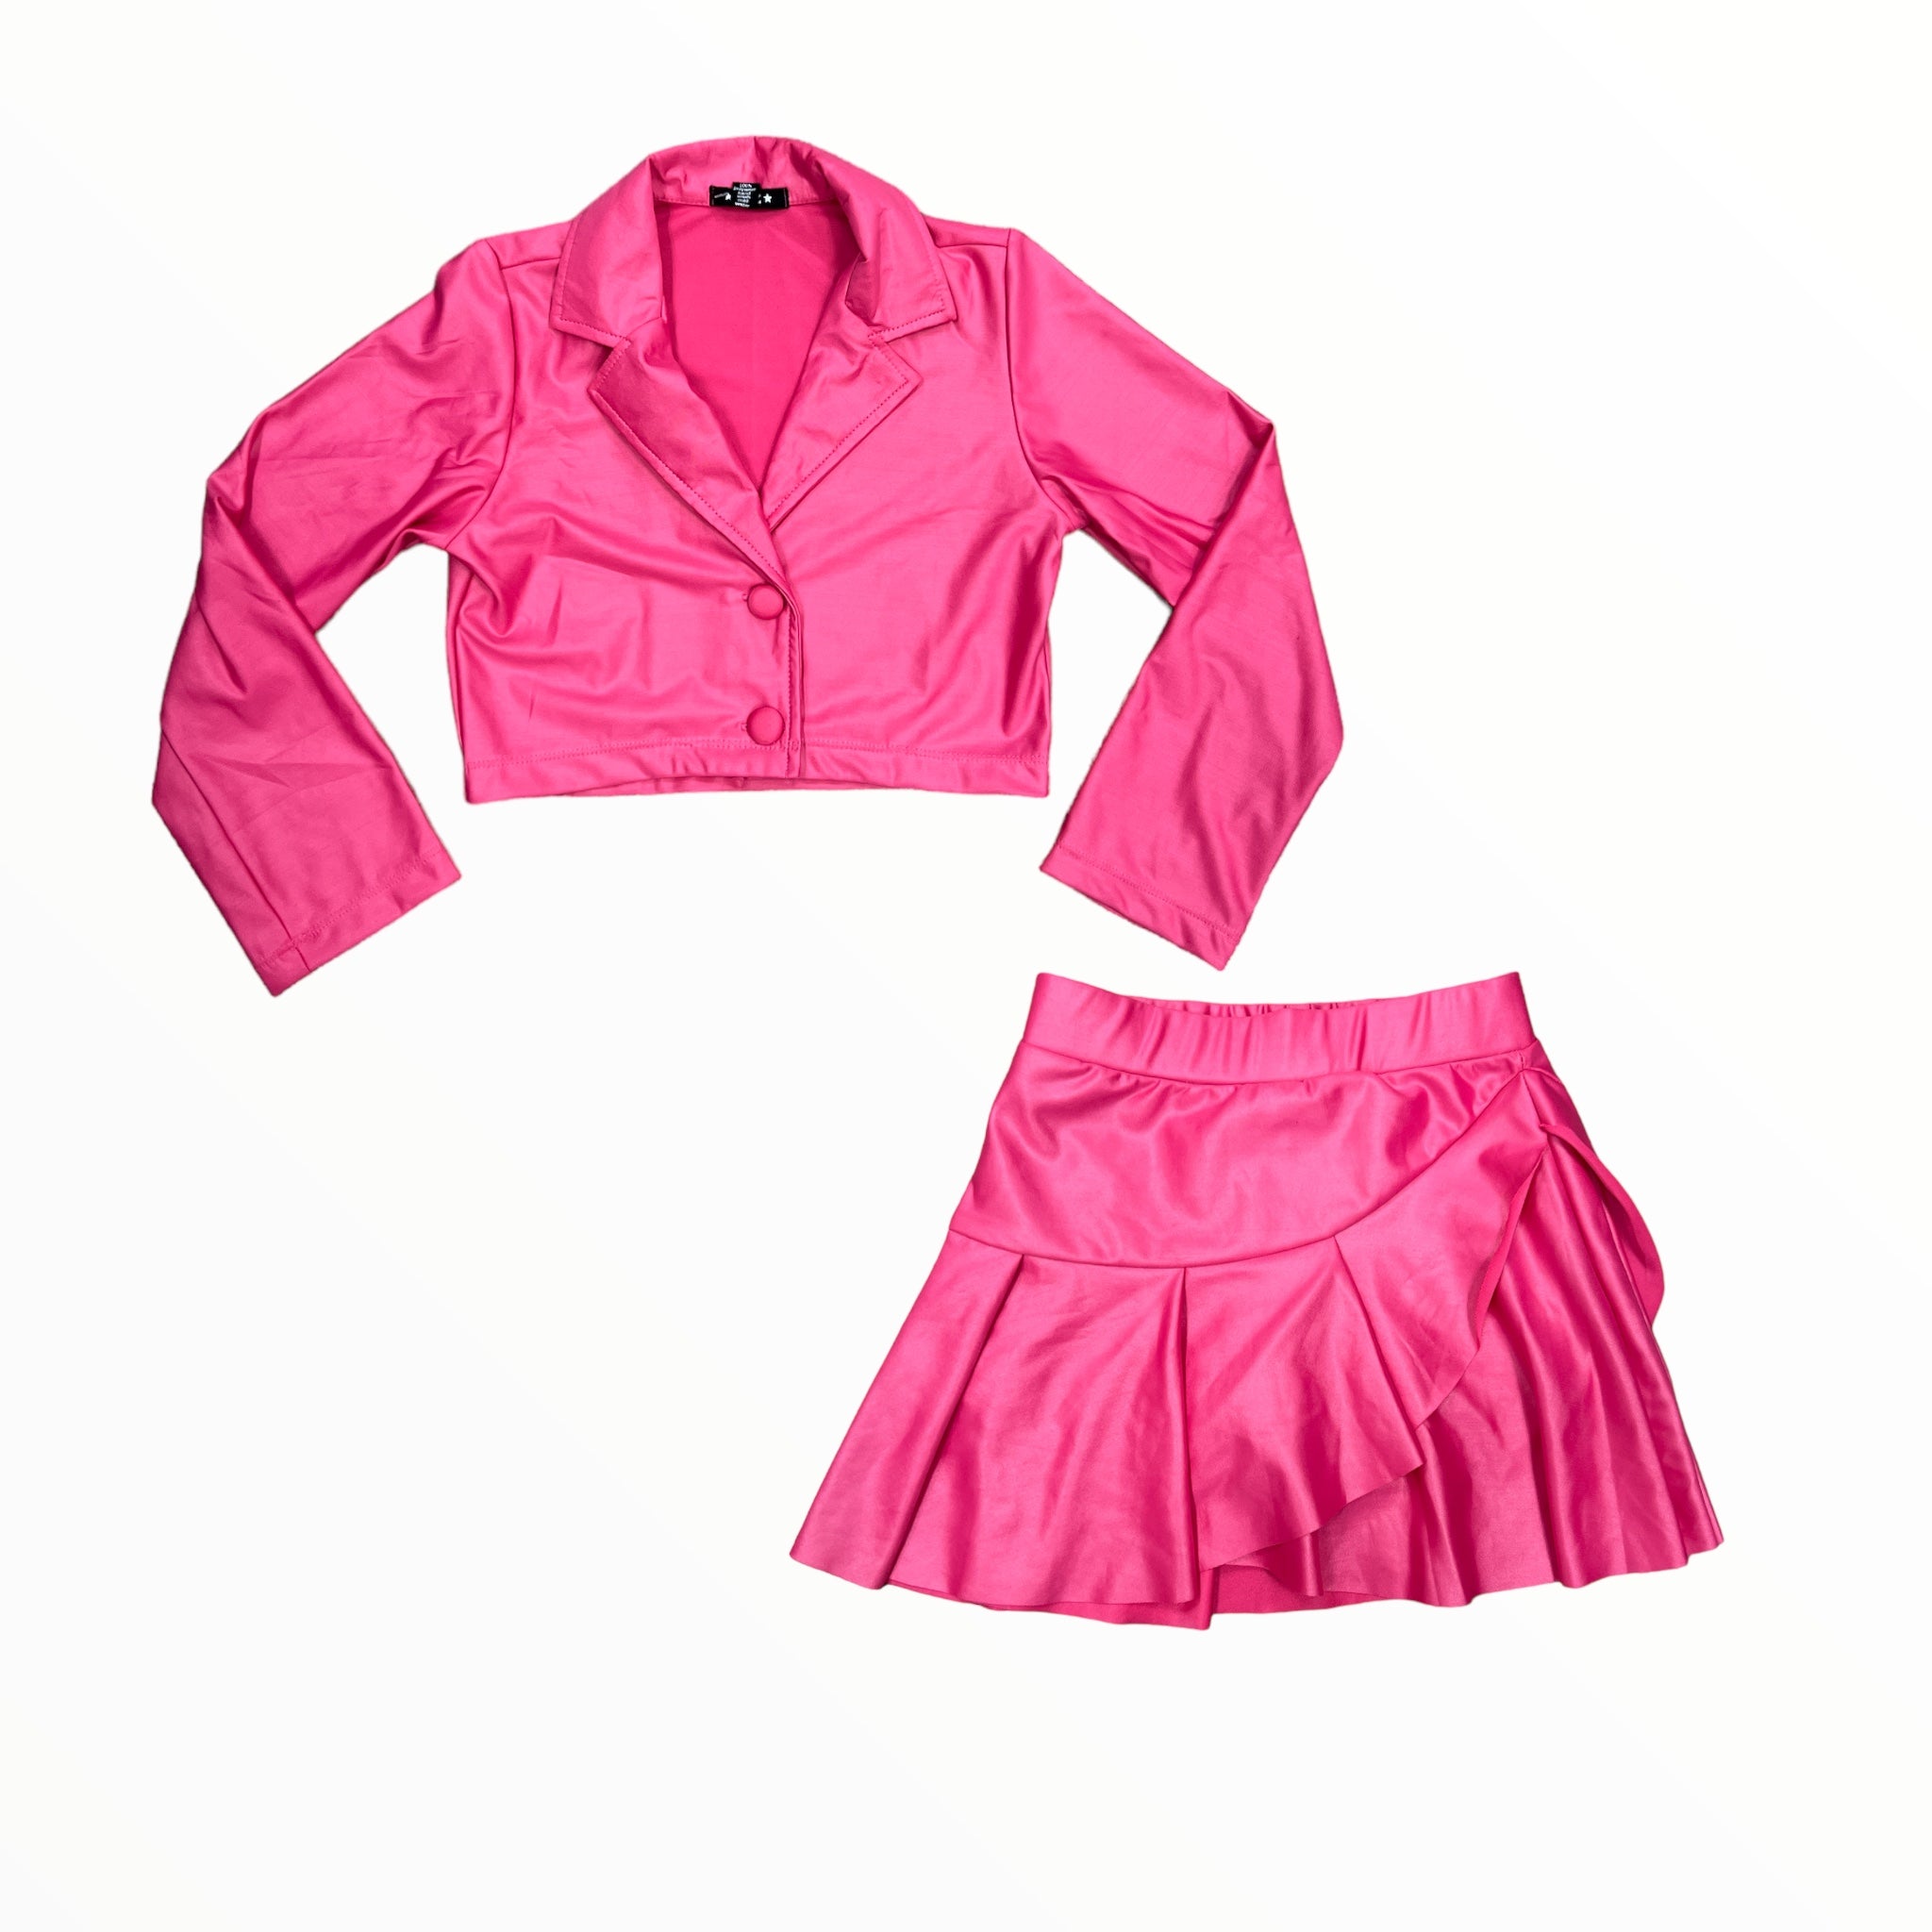 FLOWERS BY ZOE THIN PLEATHER JACKET - PINK